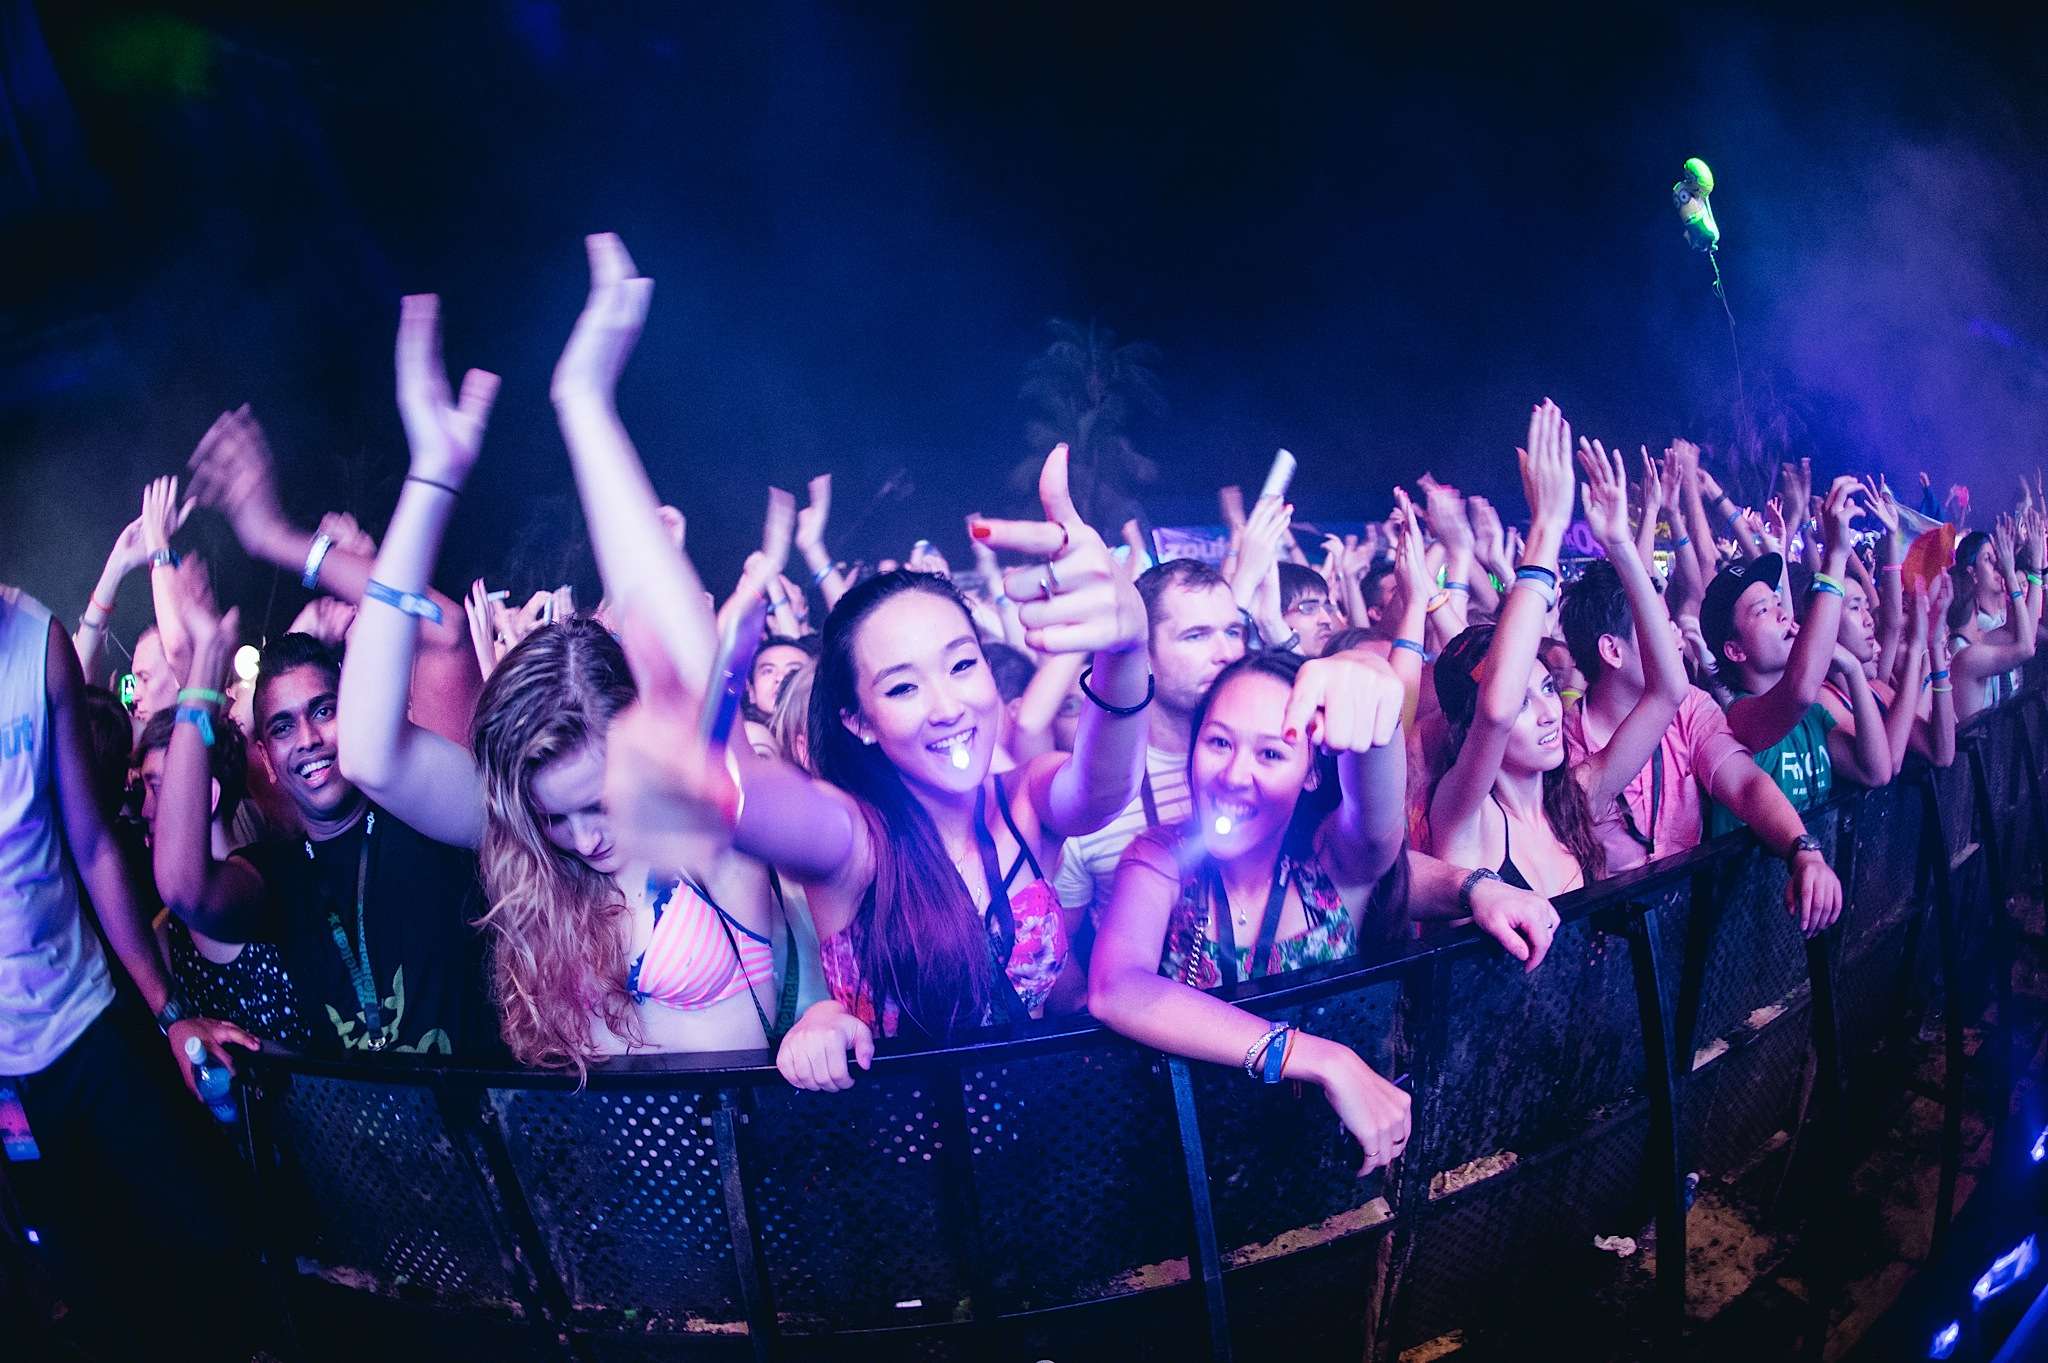 Escape the Hong Kong chill with hot beats in Singapore at Zoukout and Laneway, the Wonderfruit and Paradise Island festivals in Thailand and at India’s Sunburn four-dayer